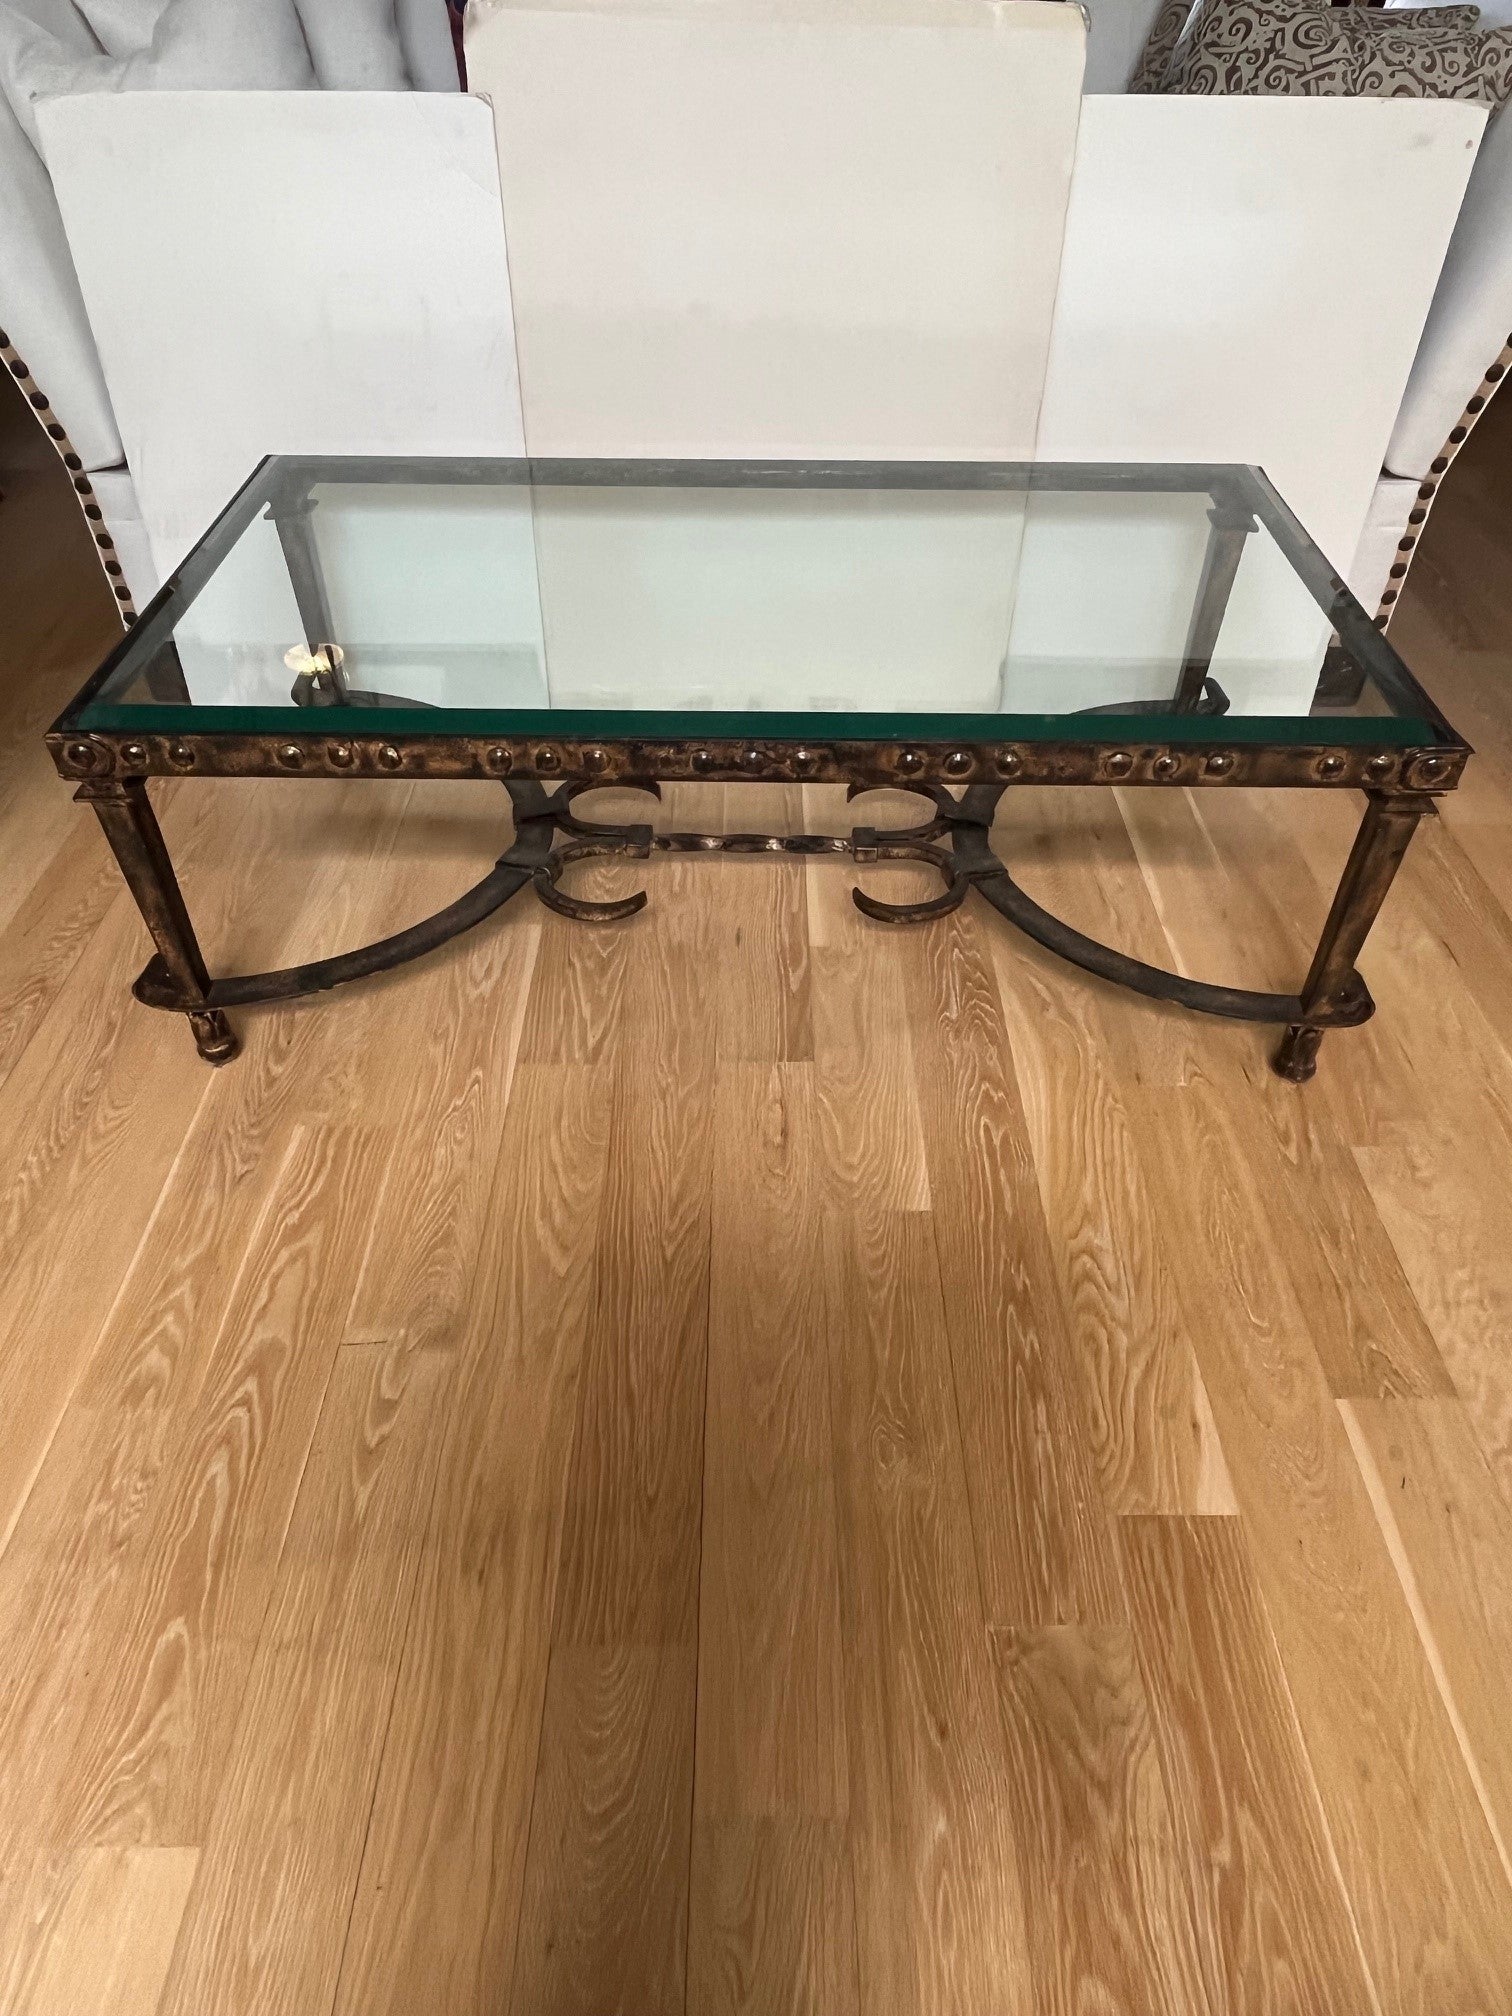 Made to Order Elegant Forged Iron Calais Coffee Table with 1/4